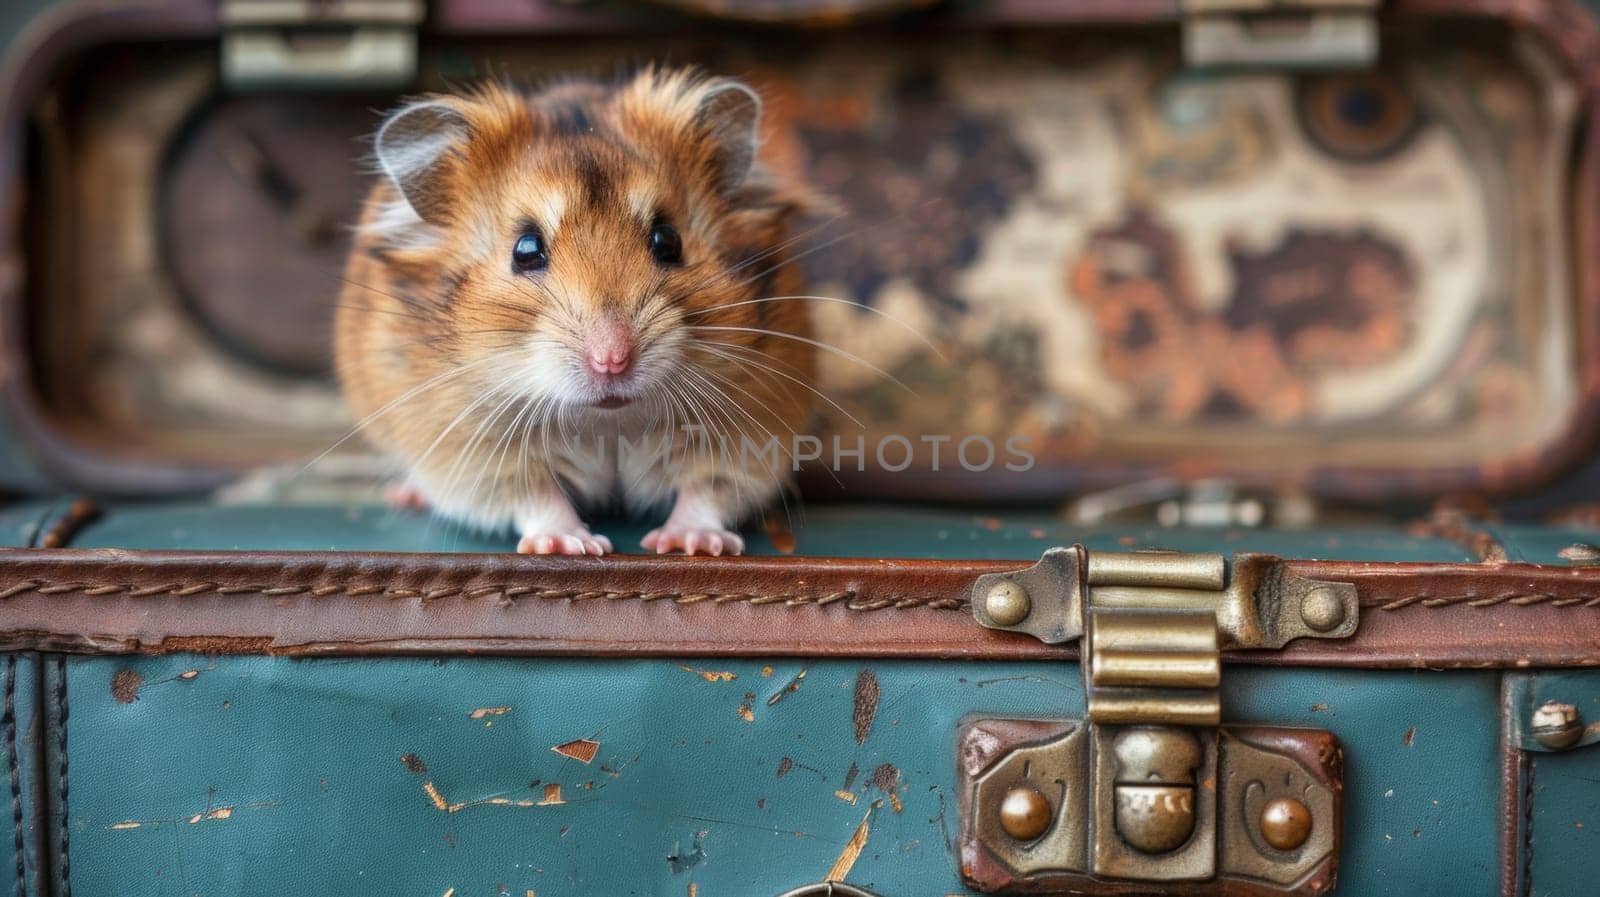 A small brown and white hamster sitting on top of a suitcase, AI by starush